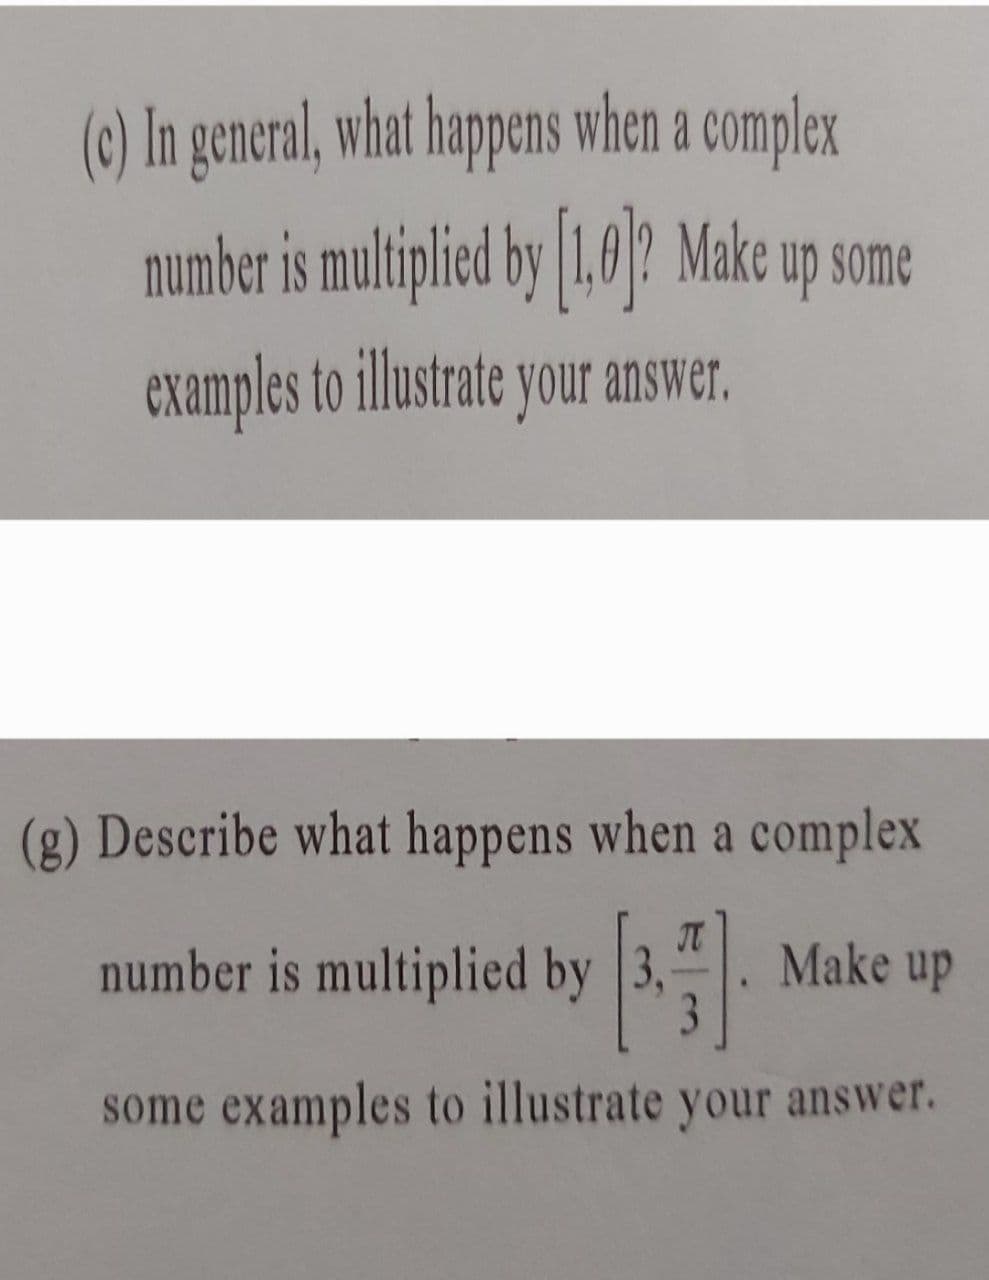 (c) In general, what happens when a complex
number is multiplied by [1,0]? Make up some
examples to illustrate your answer.
(g) Describe what happens when a complex
T
number is multiplied by 3,
4
Make up
3
some examples to illustrate your answer.